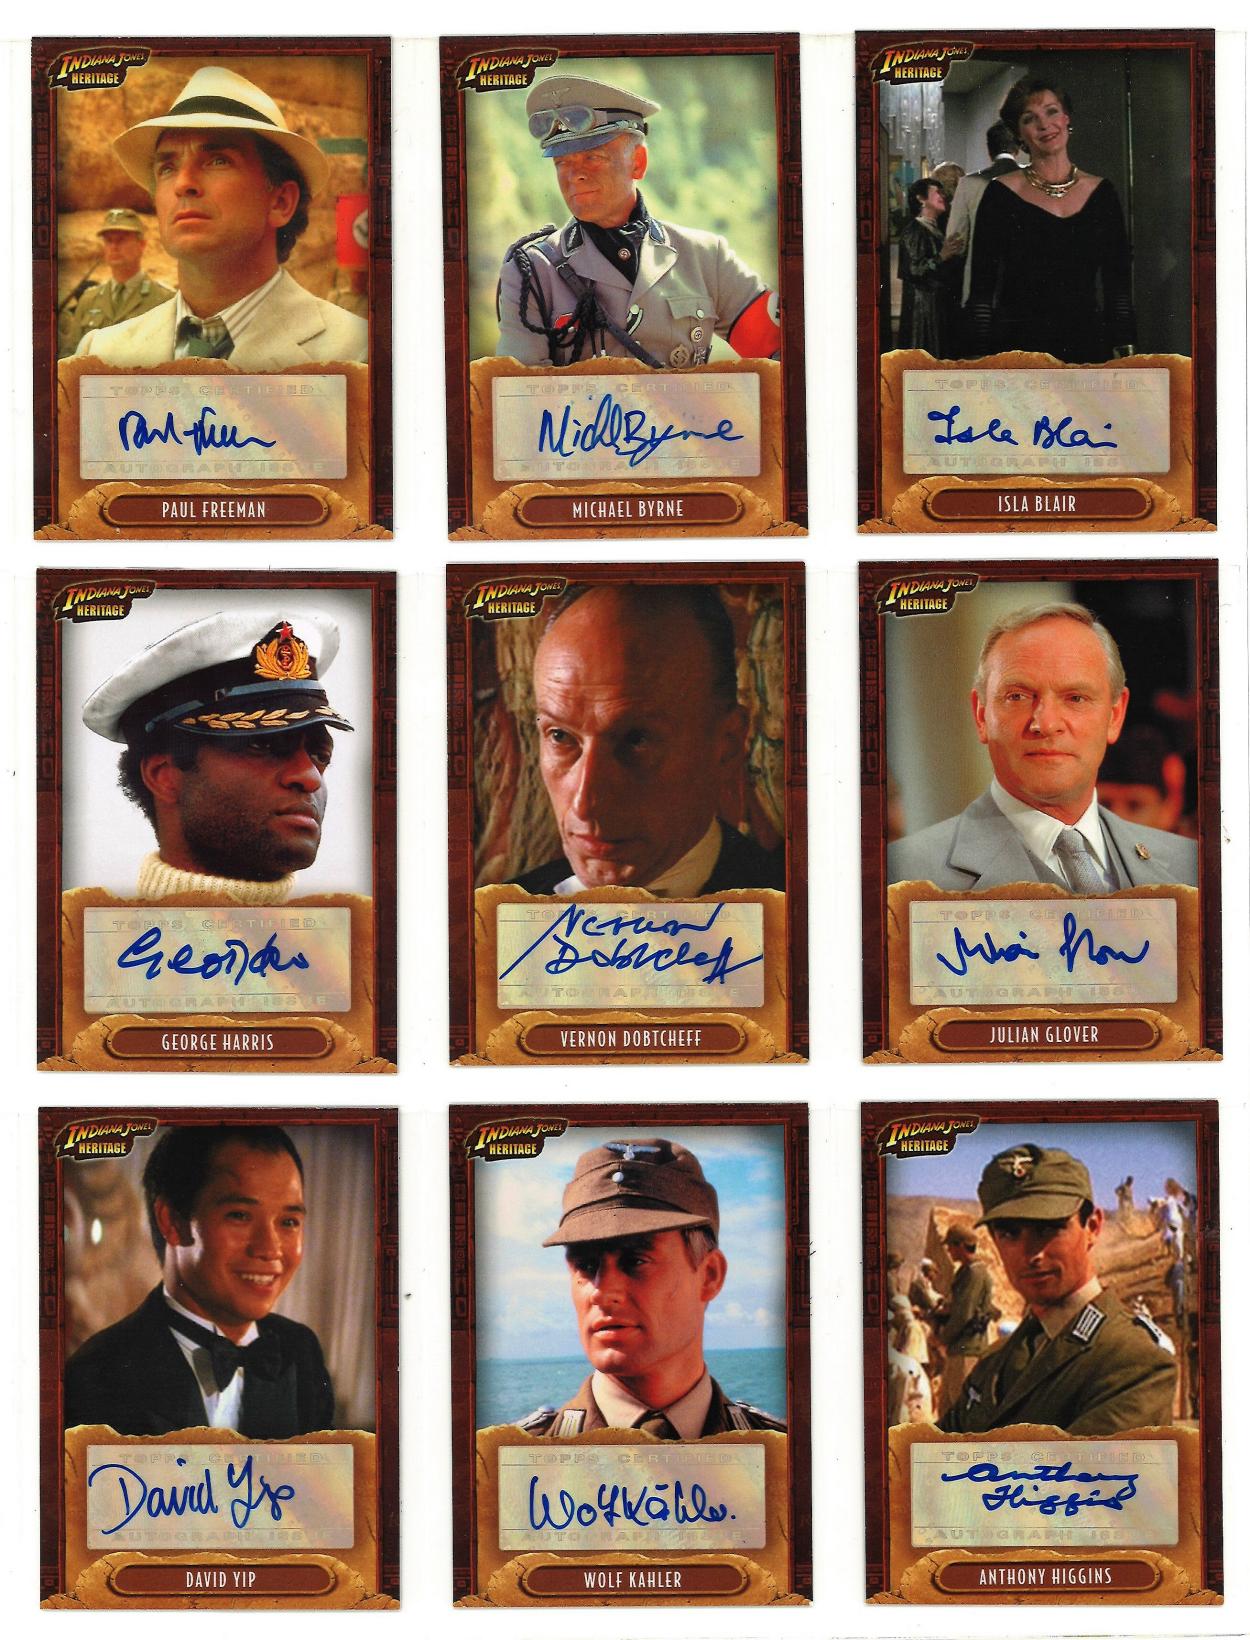 Indiana Jones Heritage Limited edition collection of 17 autographed Topps trading cards. Each card